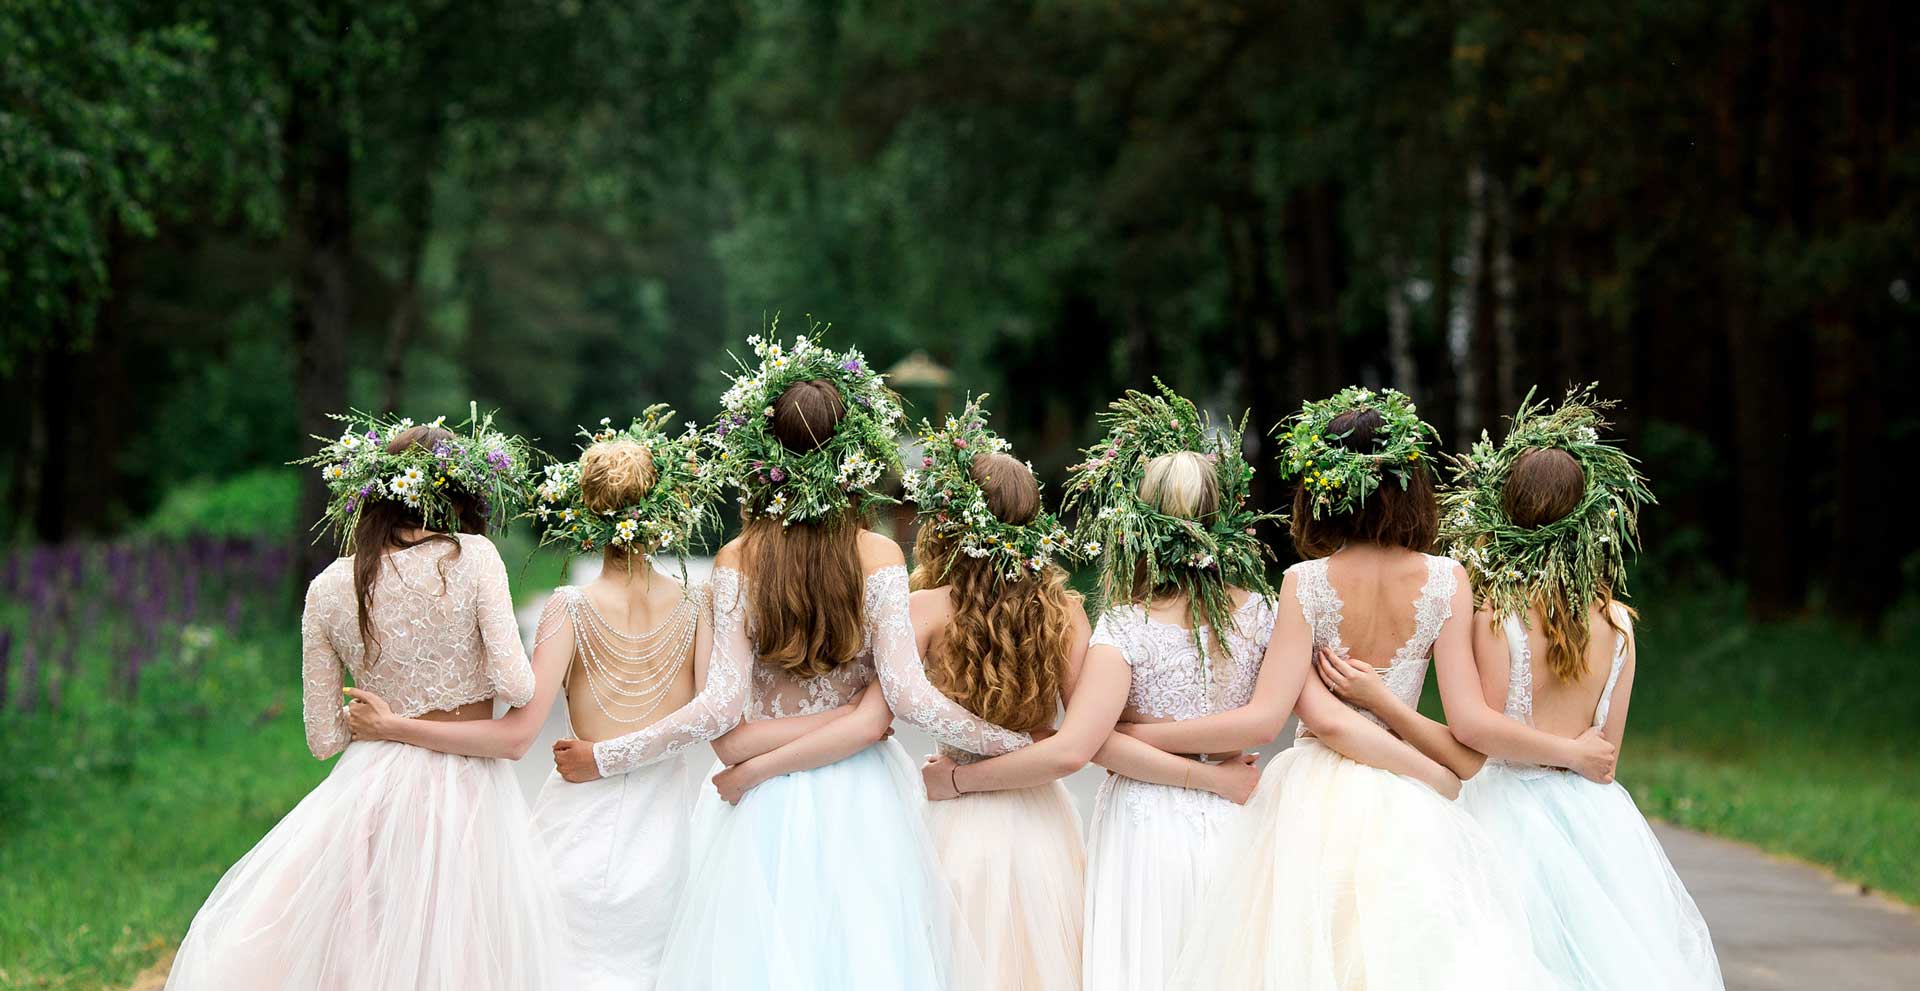 a group of women wearing white dresses with flowers on their head